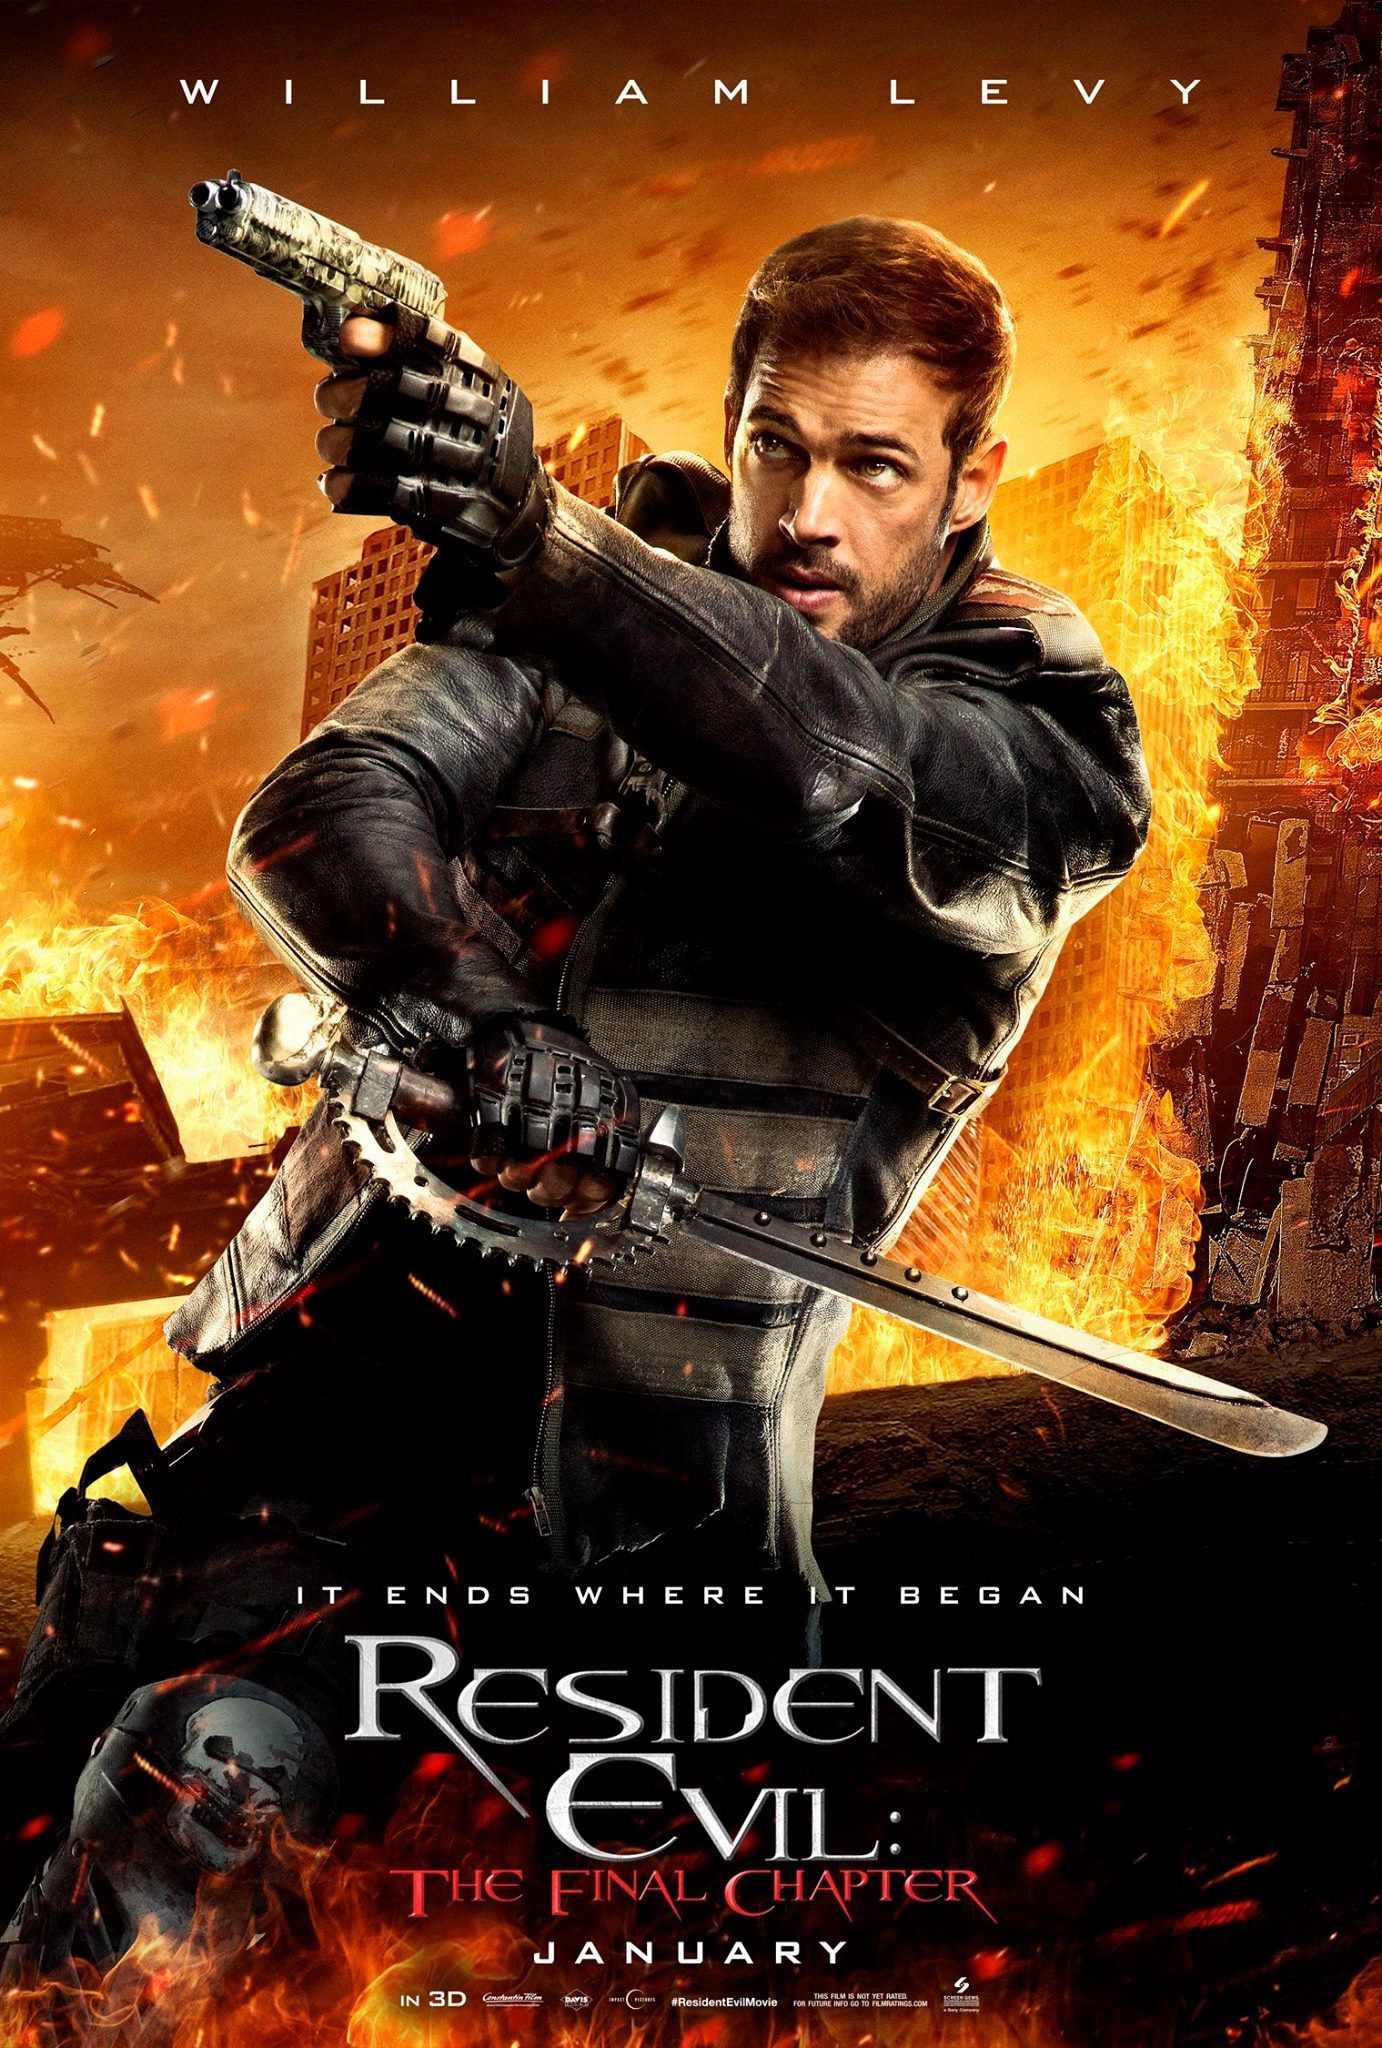 Resident Evil The Final Chapter - William Levy poster